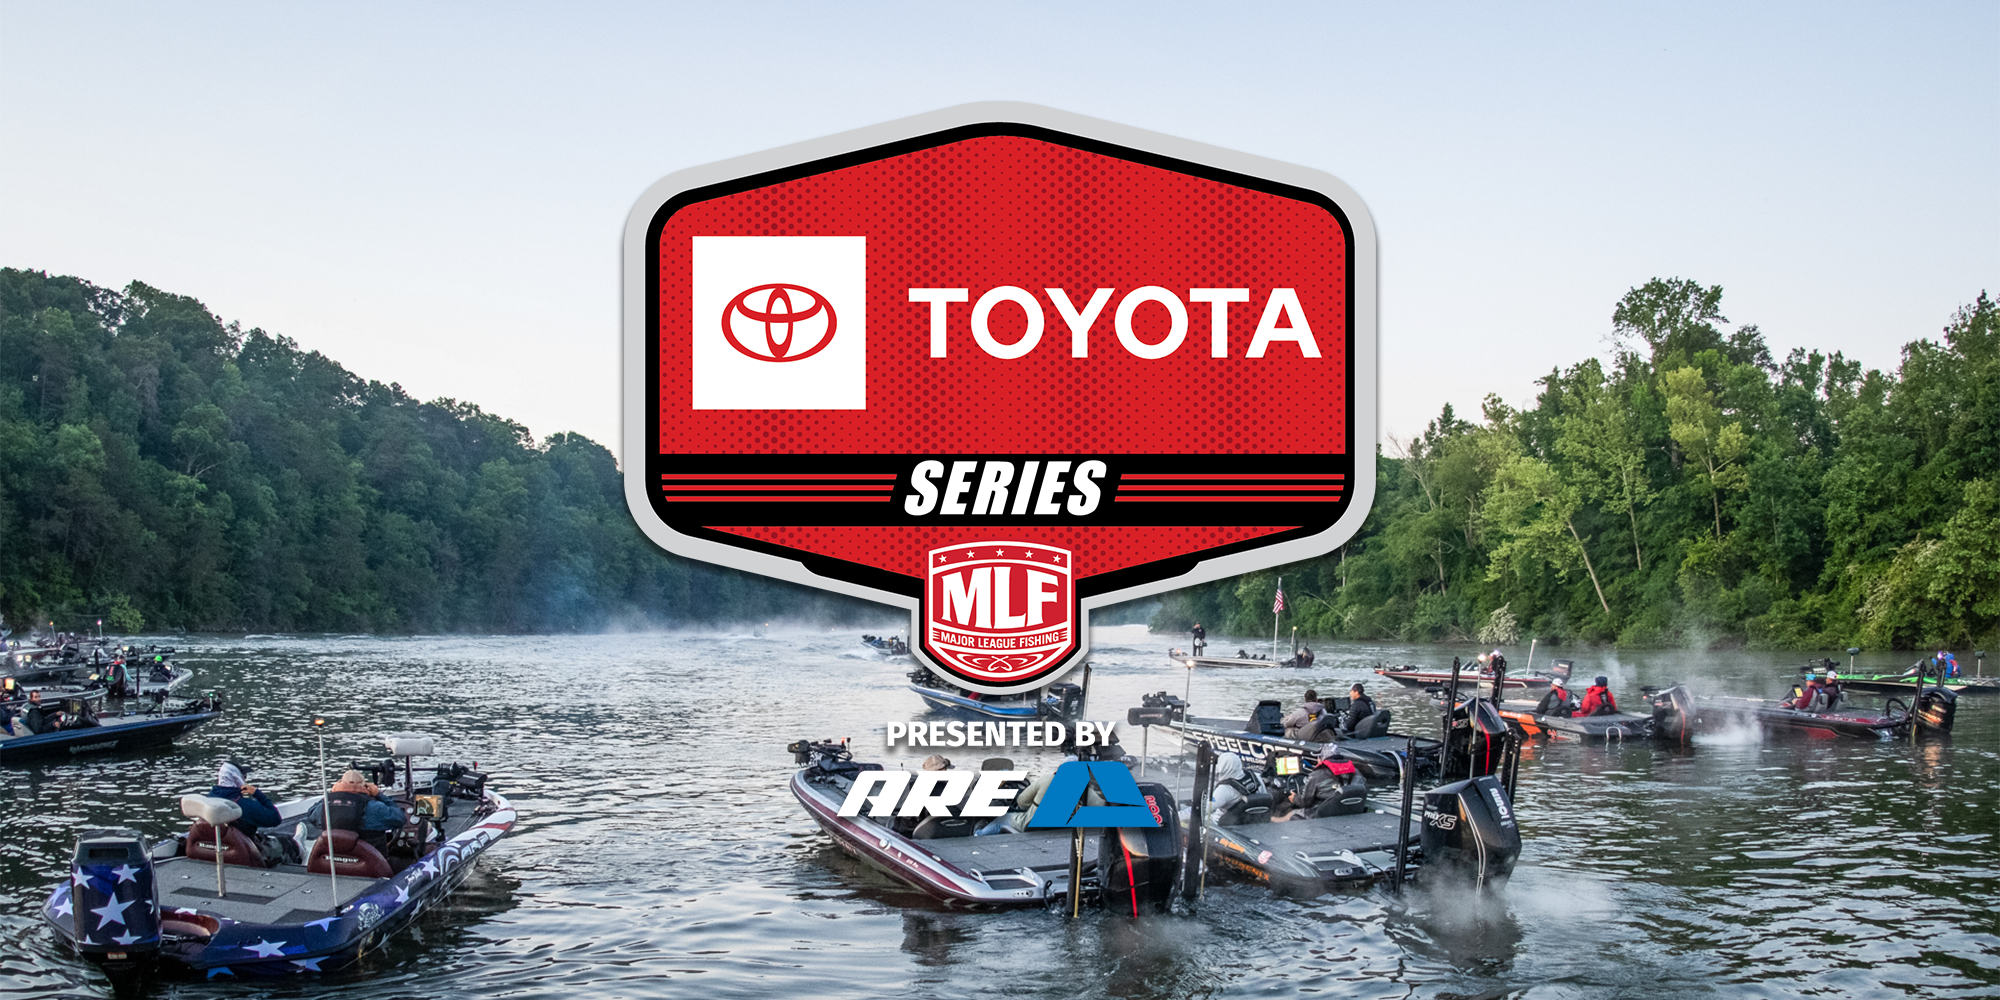 See the 2021 Toyota Series Championship Qualifiers - Major League Fishing